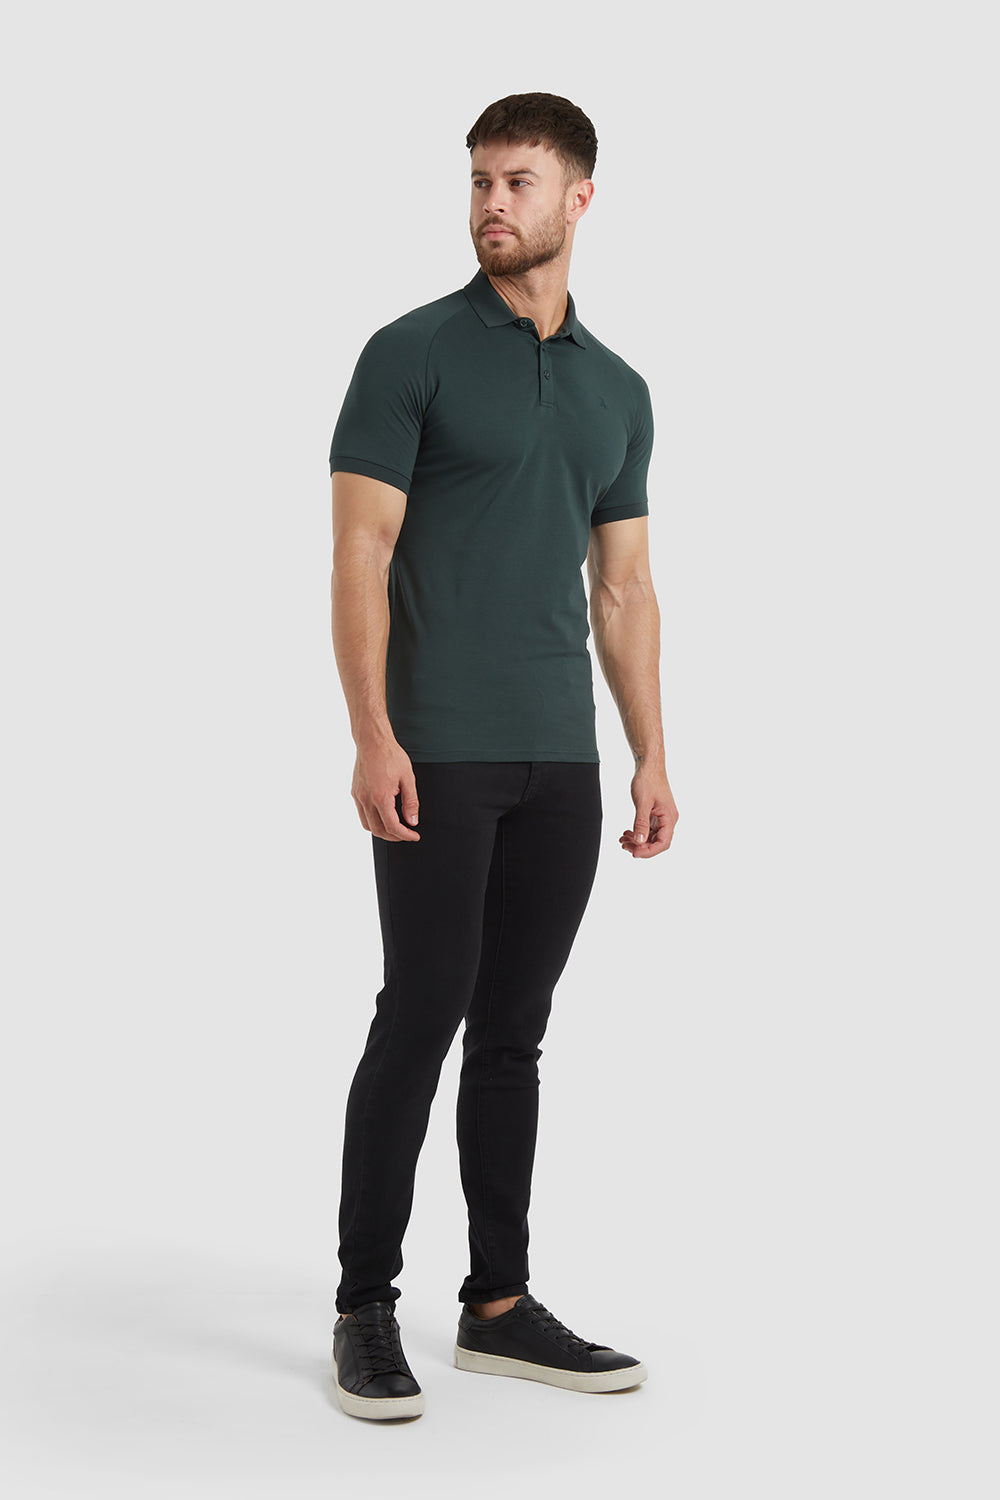 Muscle Fit Polo Shirt in Pine - TAILORED ATHLETE - ROW